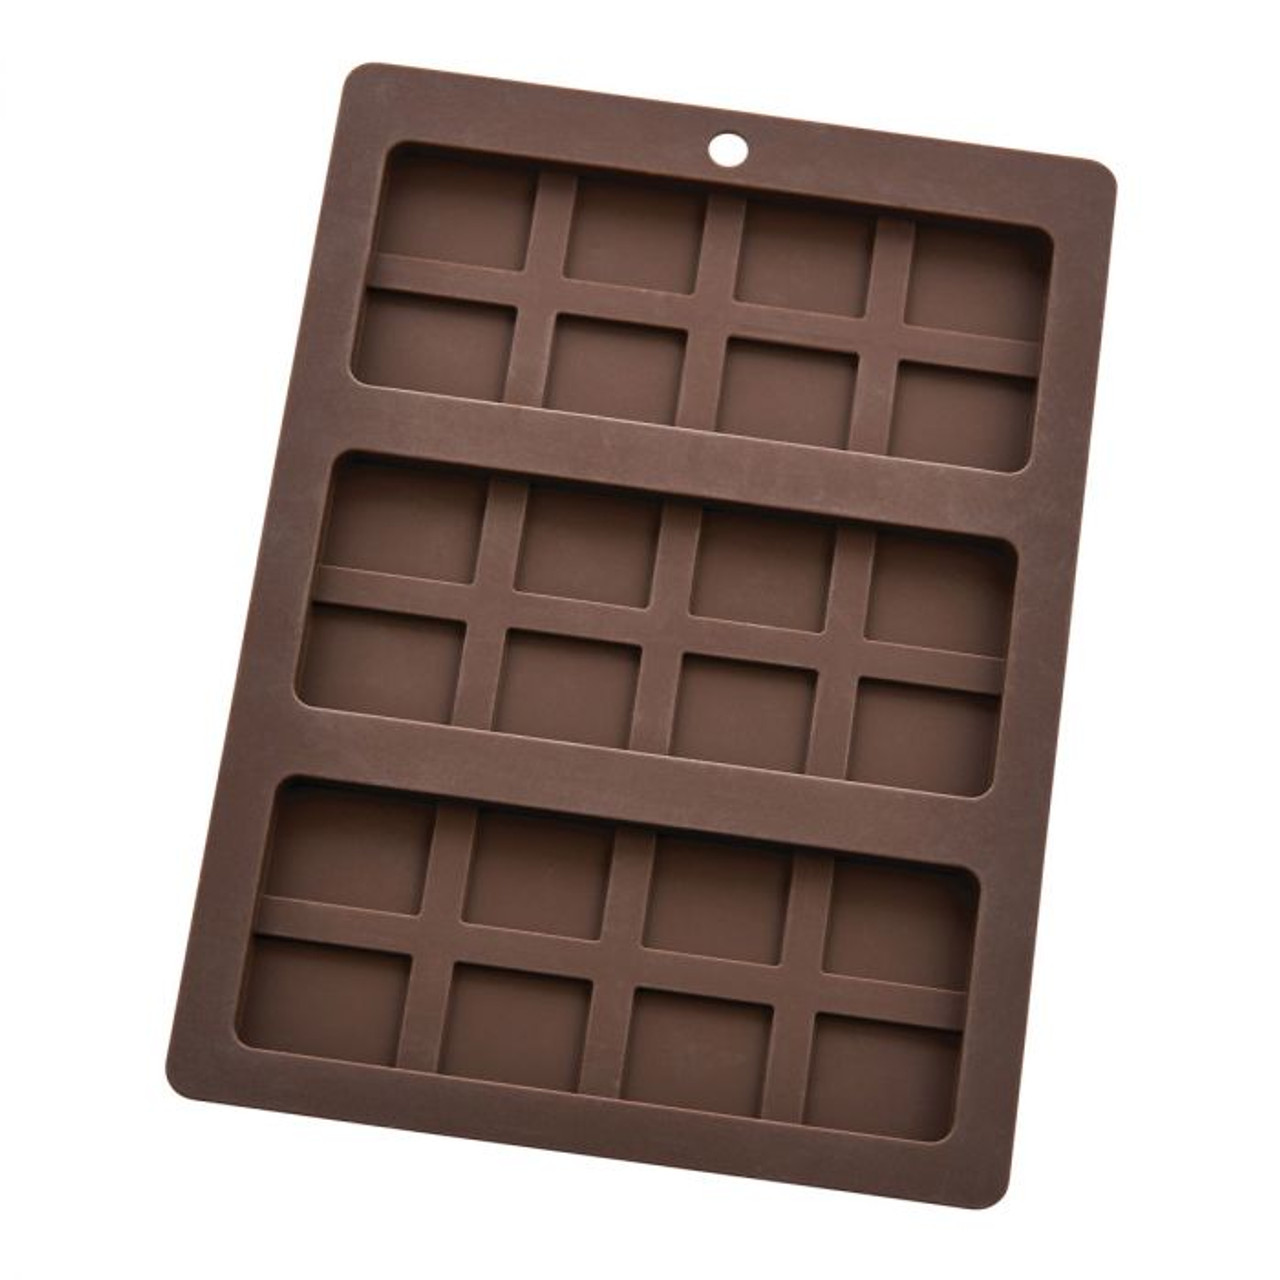 Silicone 18 Truffle Candy Mold 1 each - Fante's Kitchen Shop